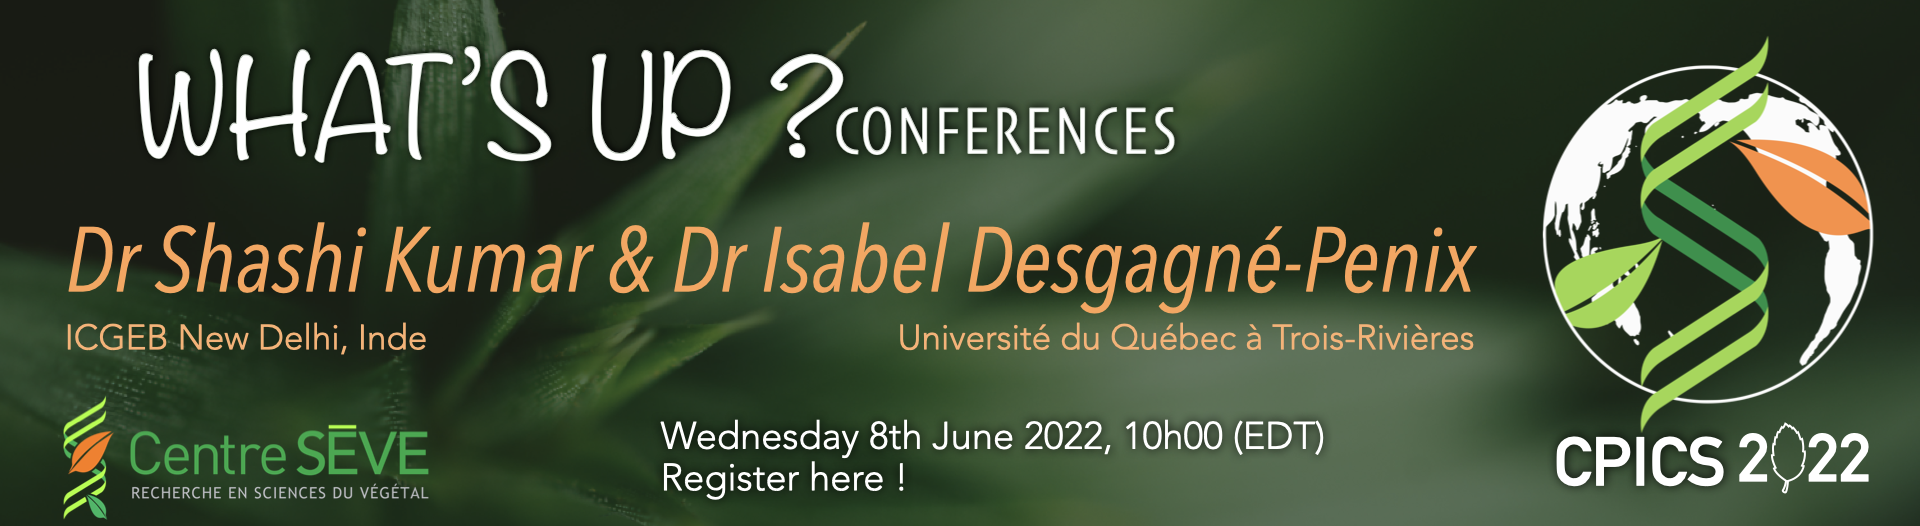 What's up conferences June 8th at 10 am with Dr. Shashi Kumar from the International Centre for Genetic Engineering and Biotechnology in India, and Dr. Isabel Desgagné-Penix, from the Université du Québec à Trois-Rivières